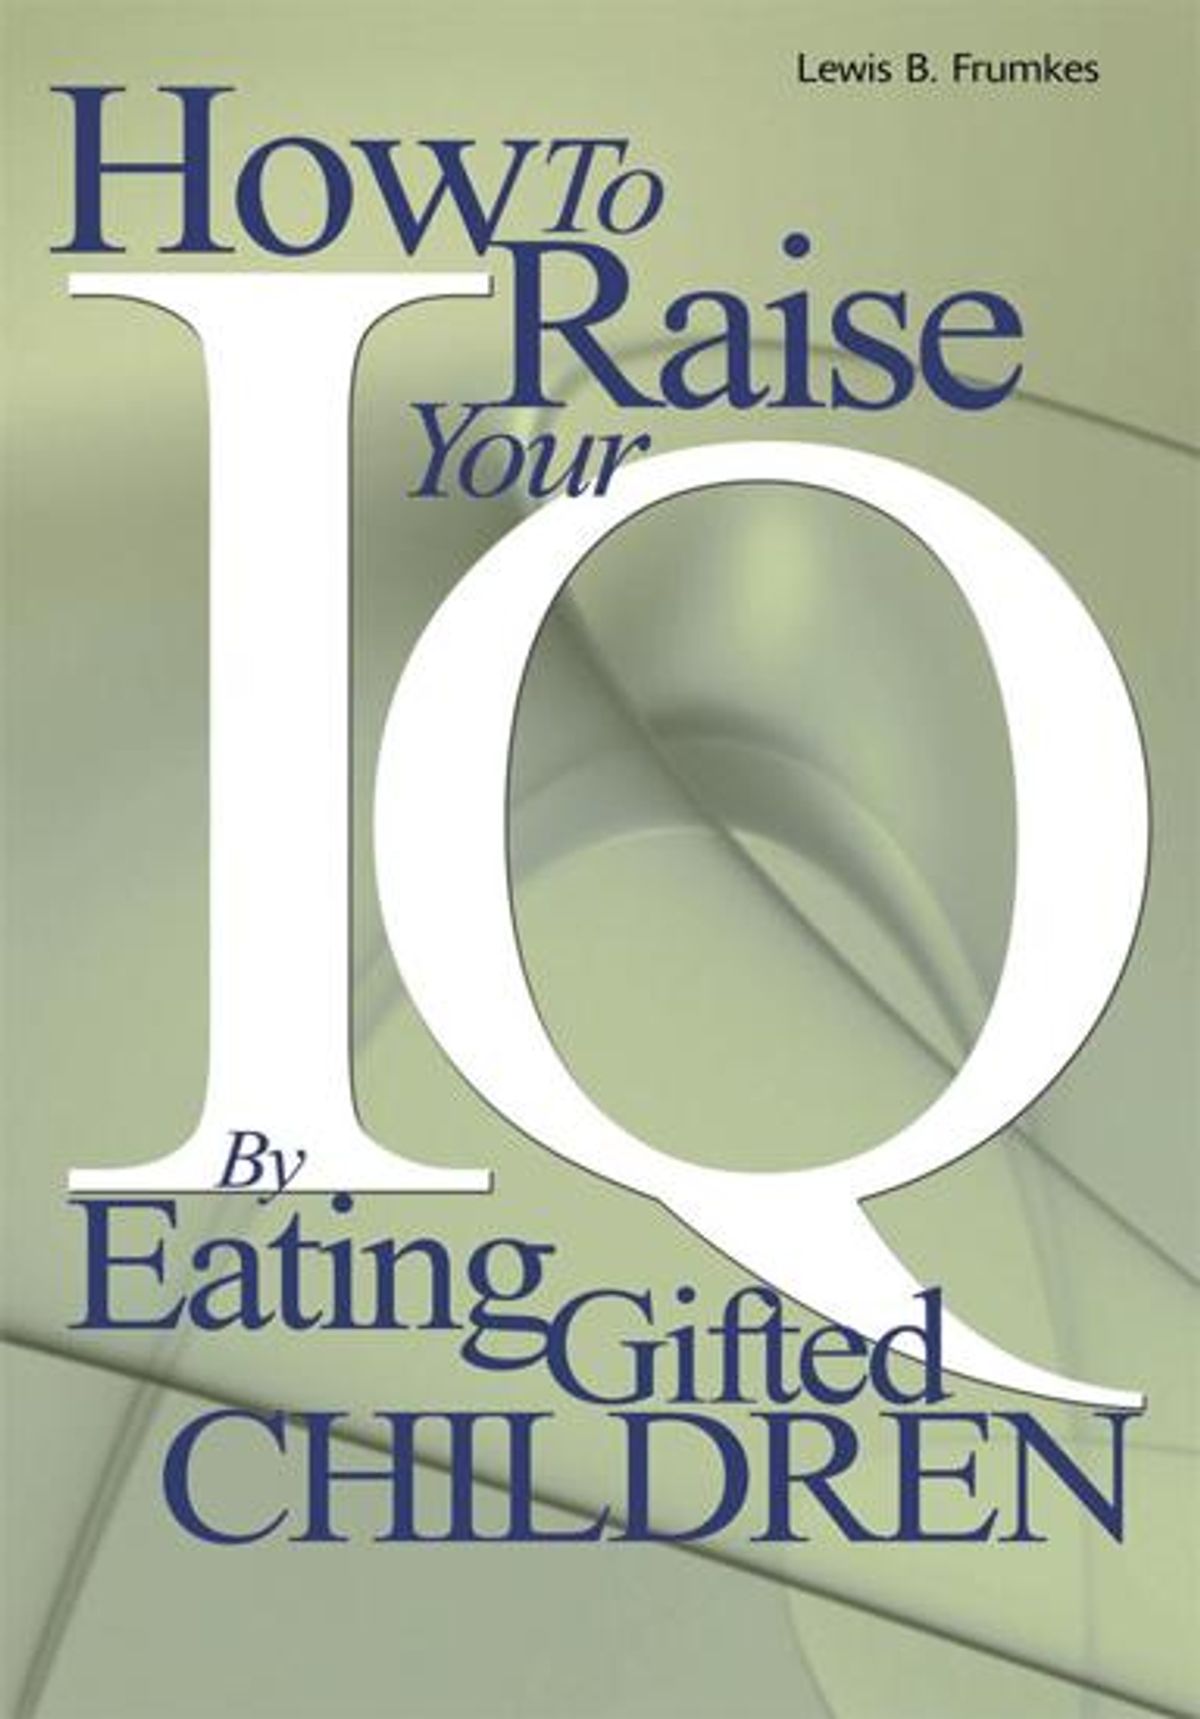 'How to Raise Your IQ by Eating Gifted Children' by Lewis B. Frumkes